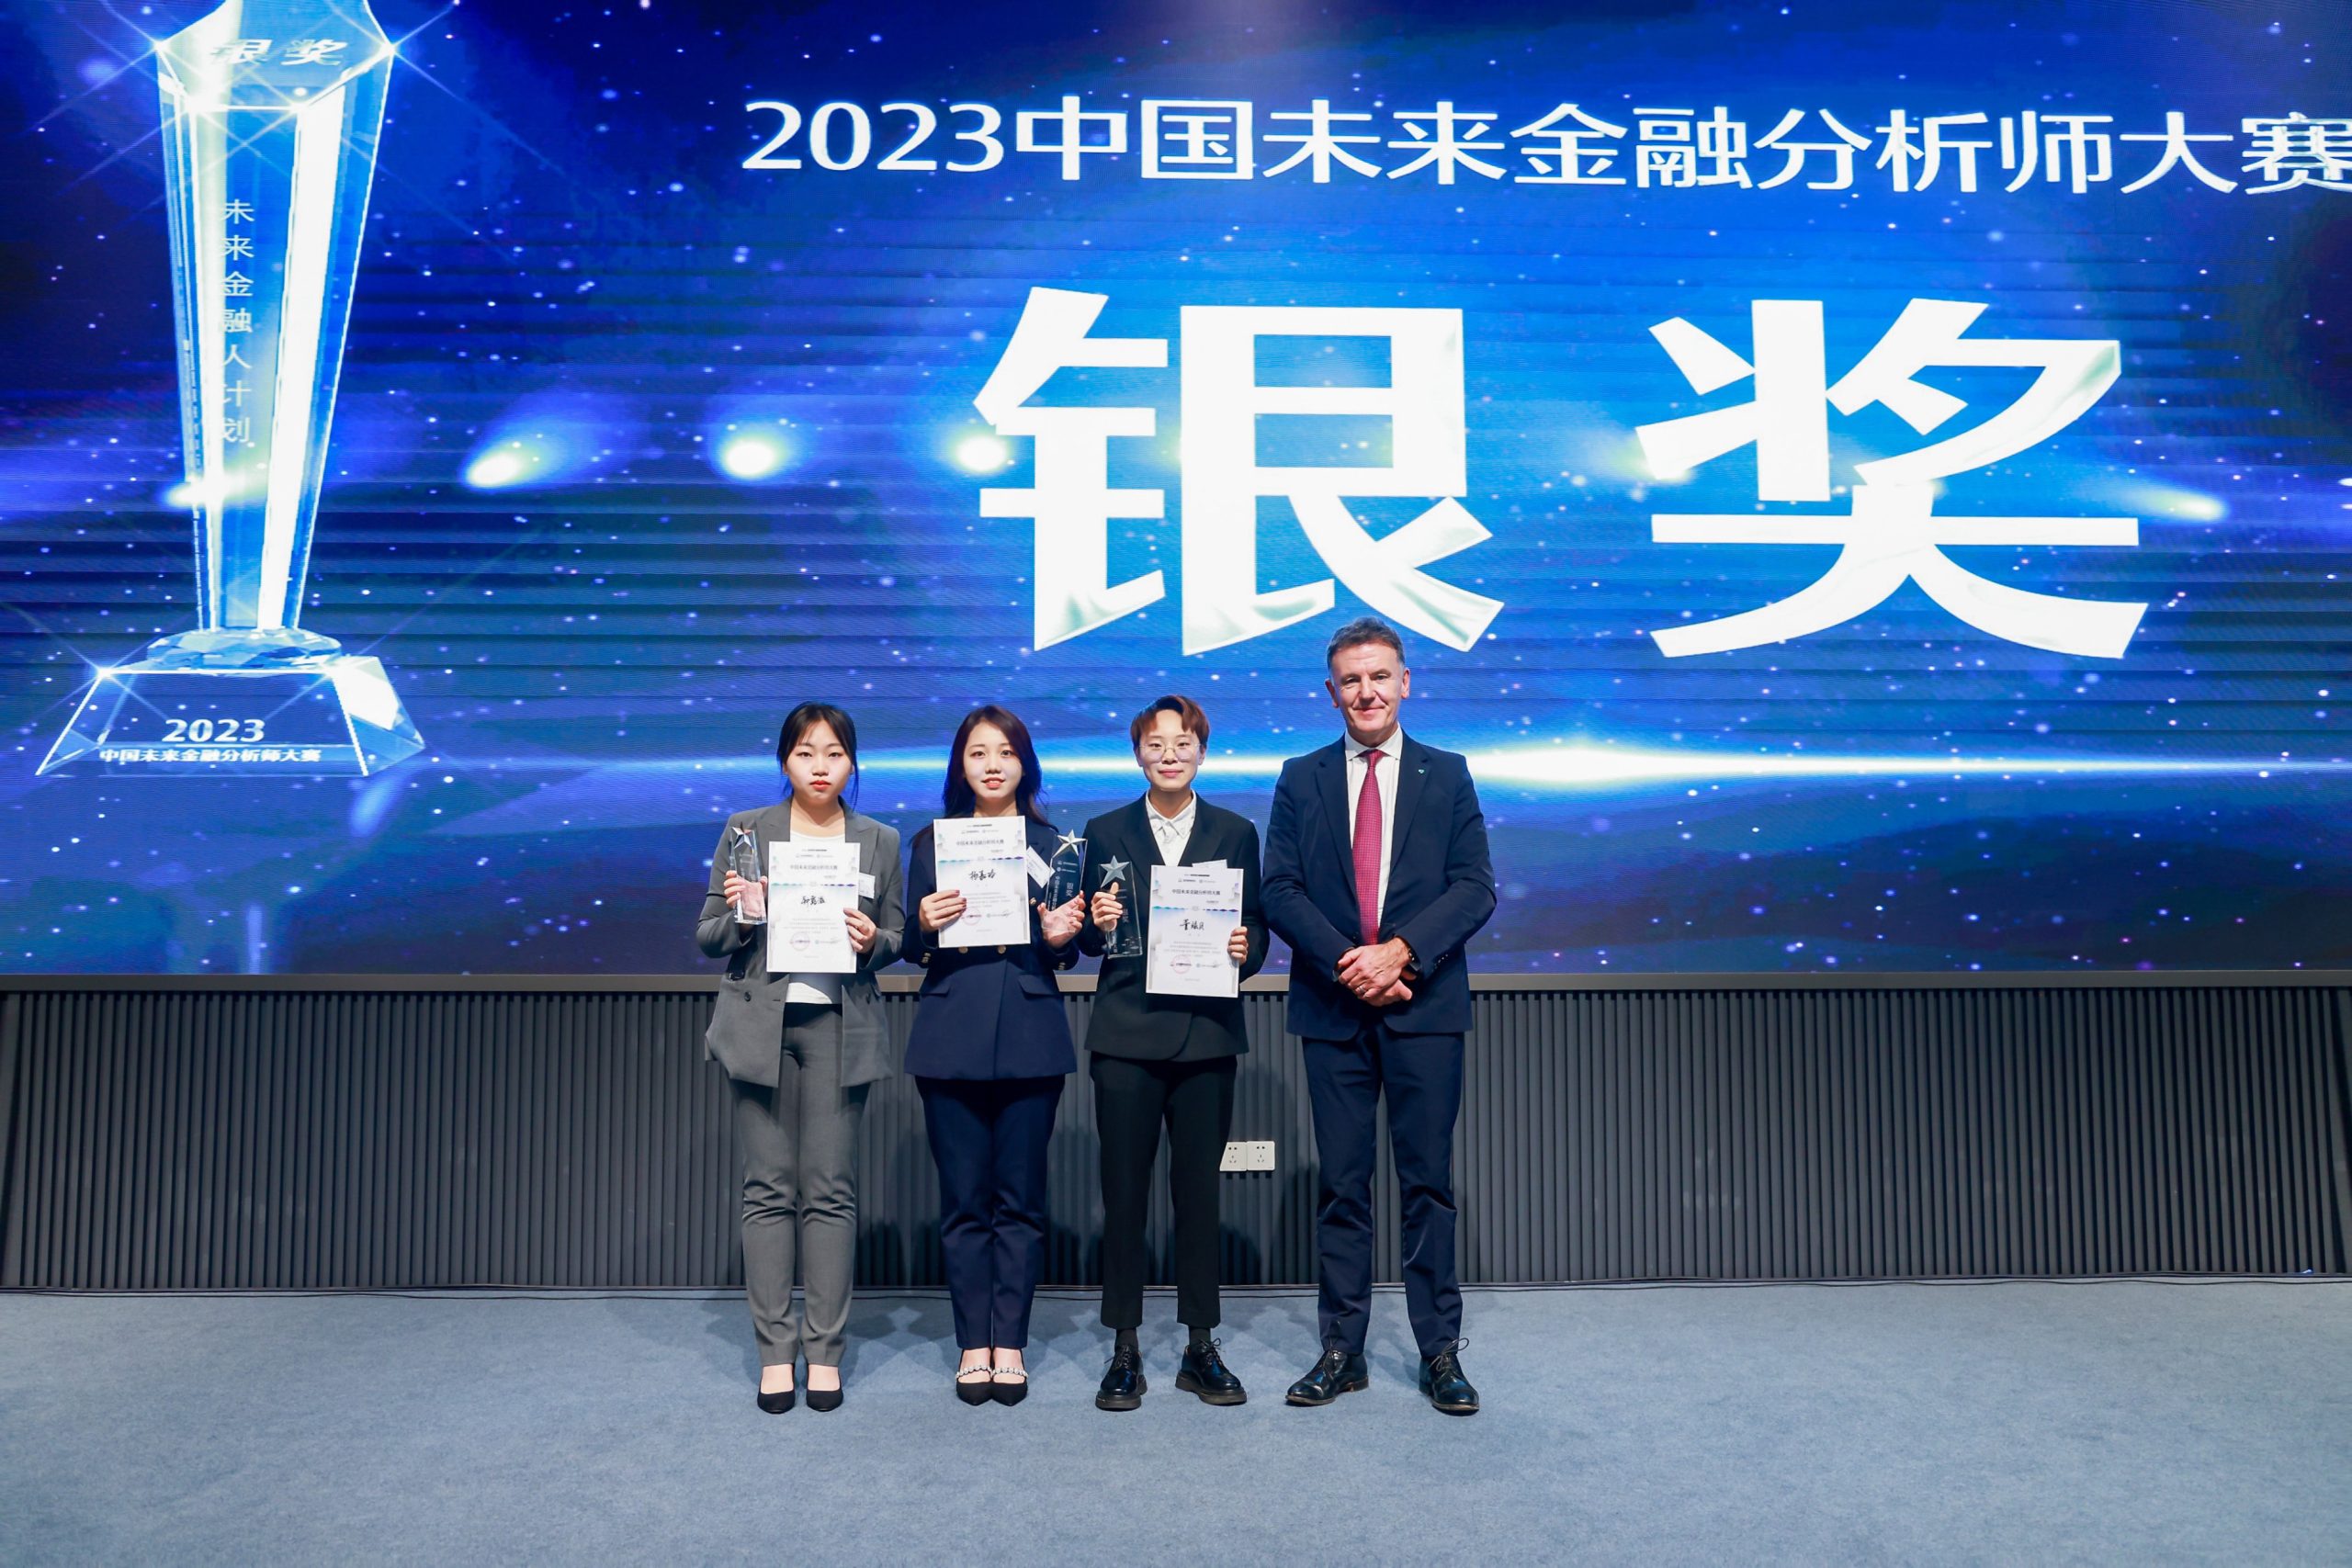 IBSS students have won the silver award at the 2023 Future Financial Analyst Competition